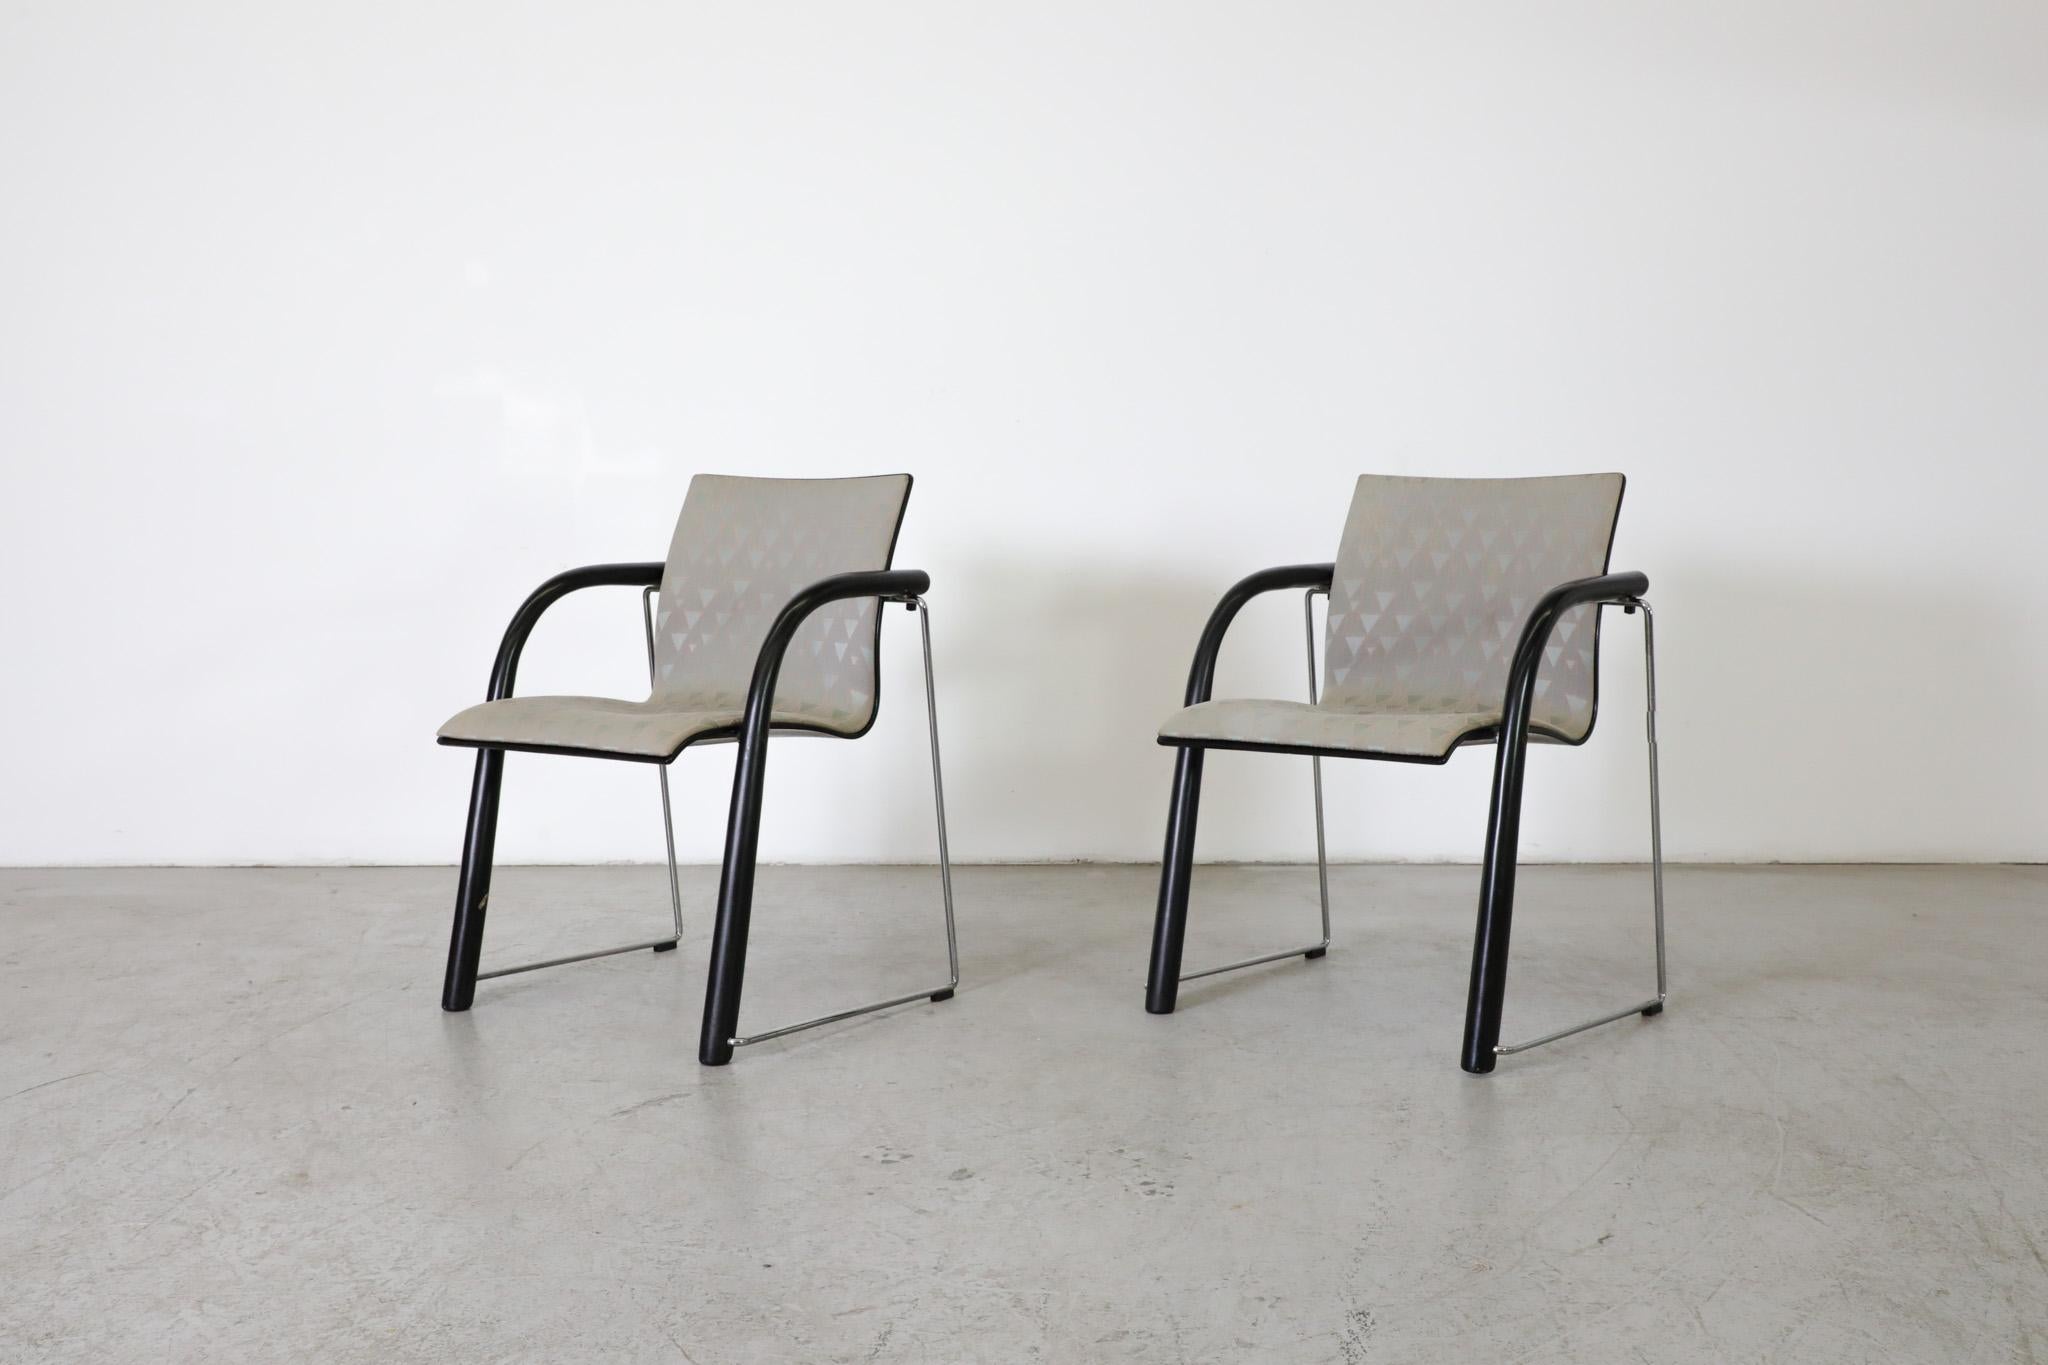 Designers Ulrich Böhme and Wulf Schneider created the S320 in 1984 for iconic manufacturer Thonet. The chair has a timeless design, is stackable, very robust, and extremely comfortable thanks to the shaped, ergonomic seat shell. In original